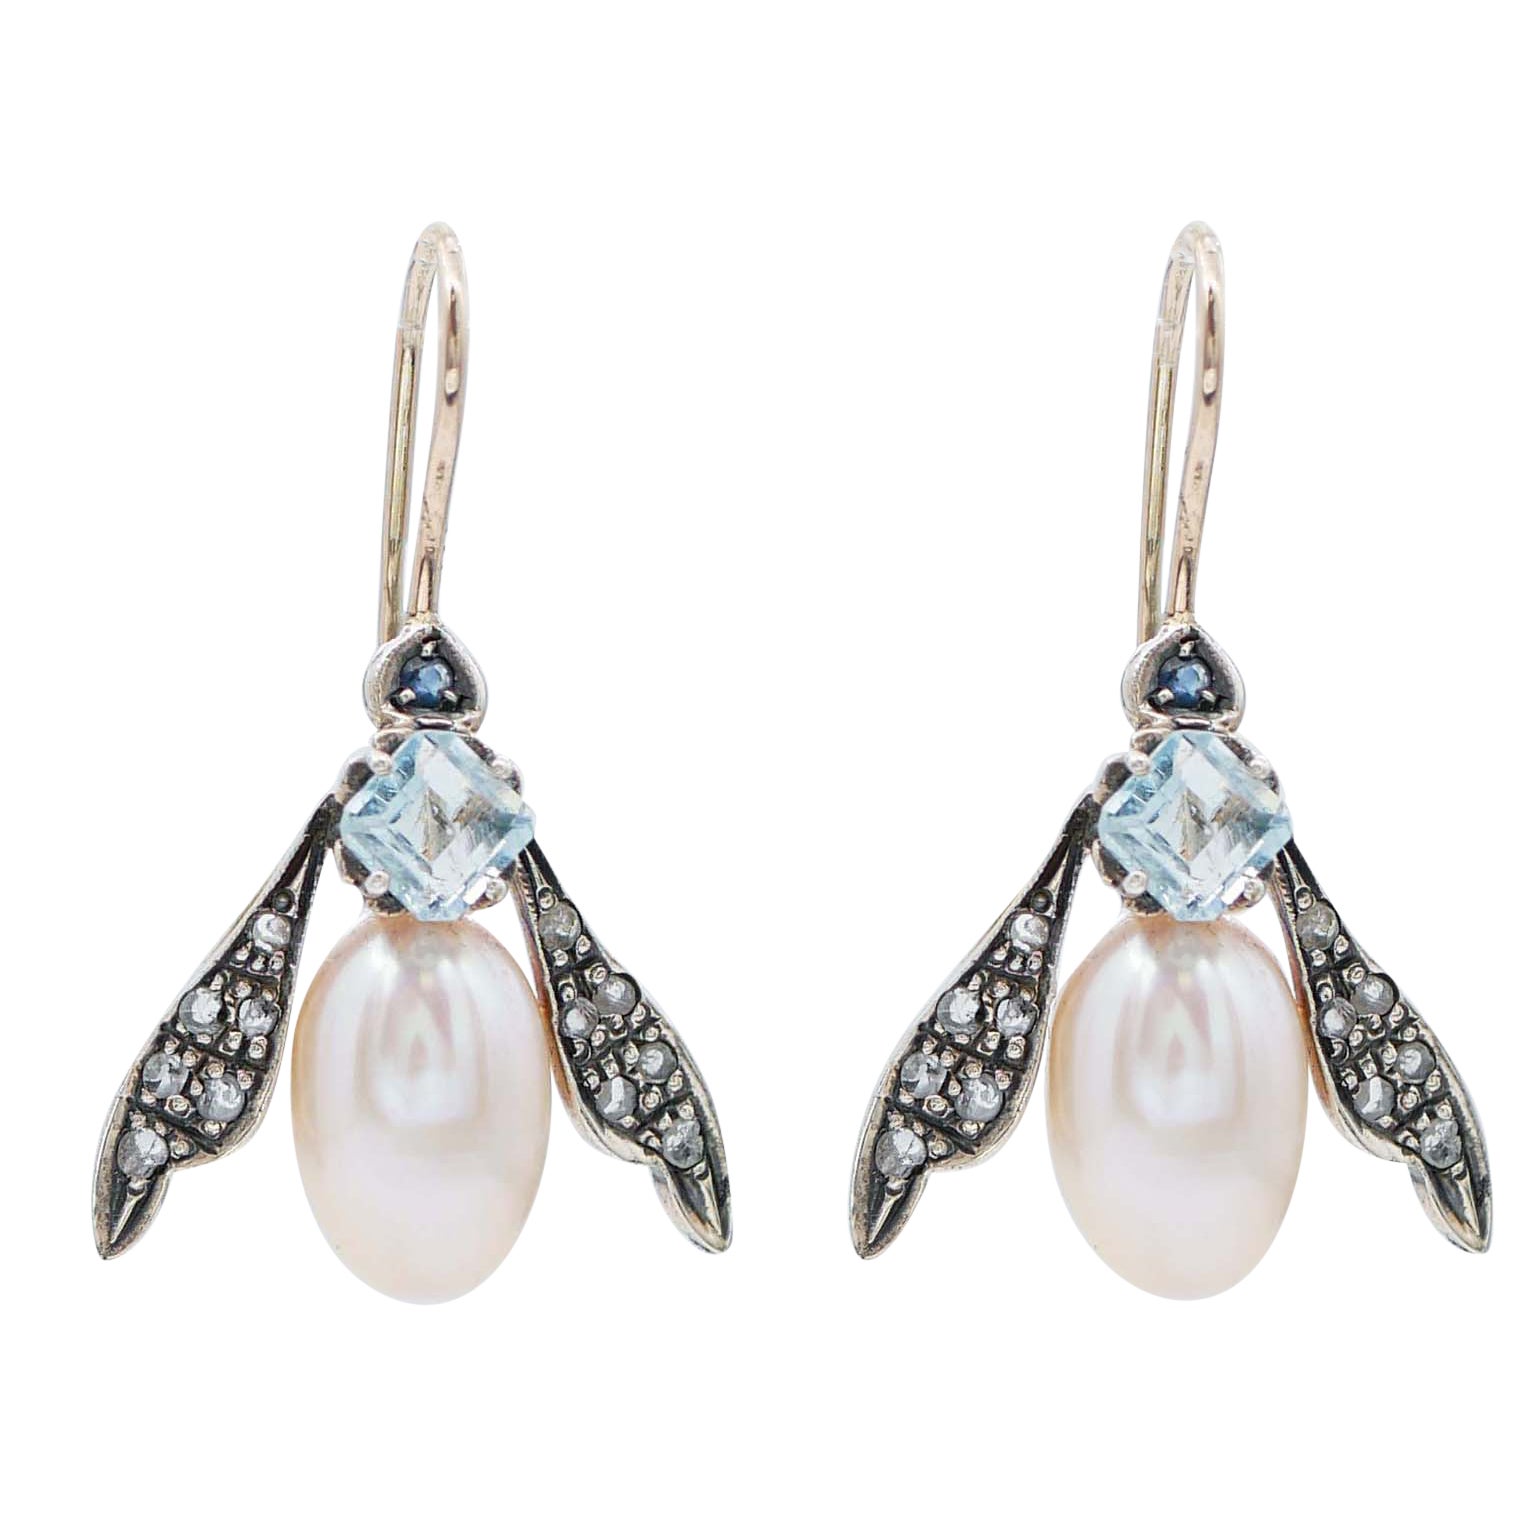 Topazs, Sapphires, Pearls, Diamonds, Rose Gold and Silver Fly Shape Earrings